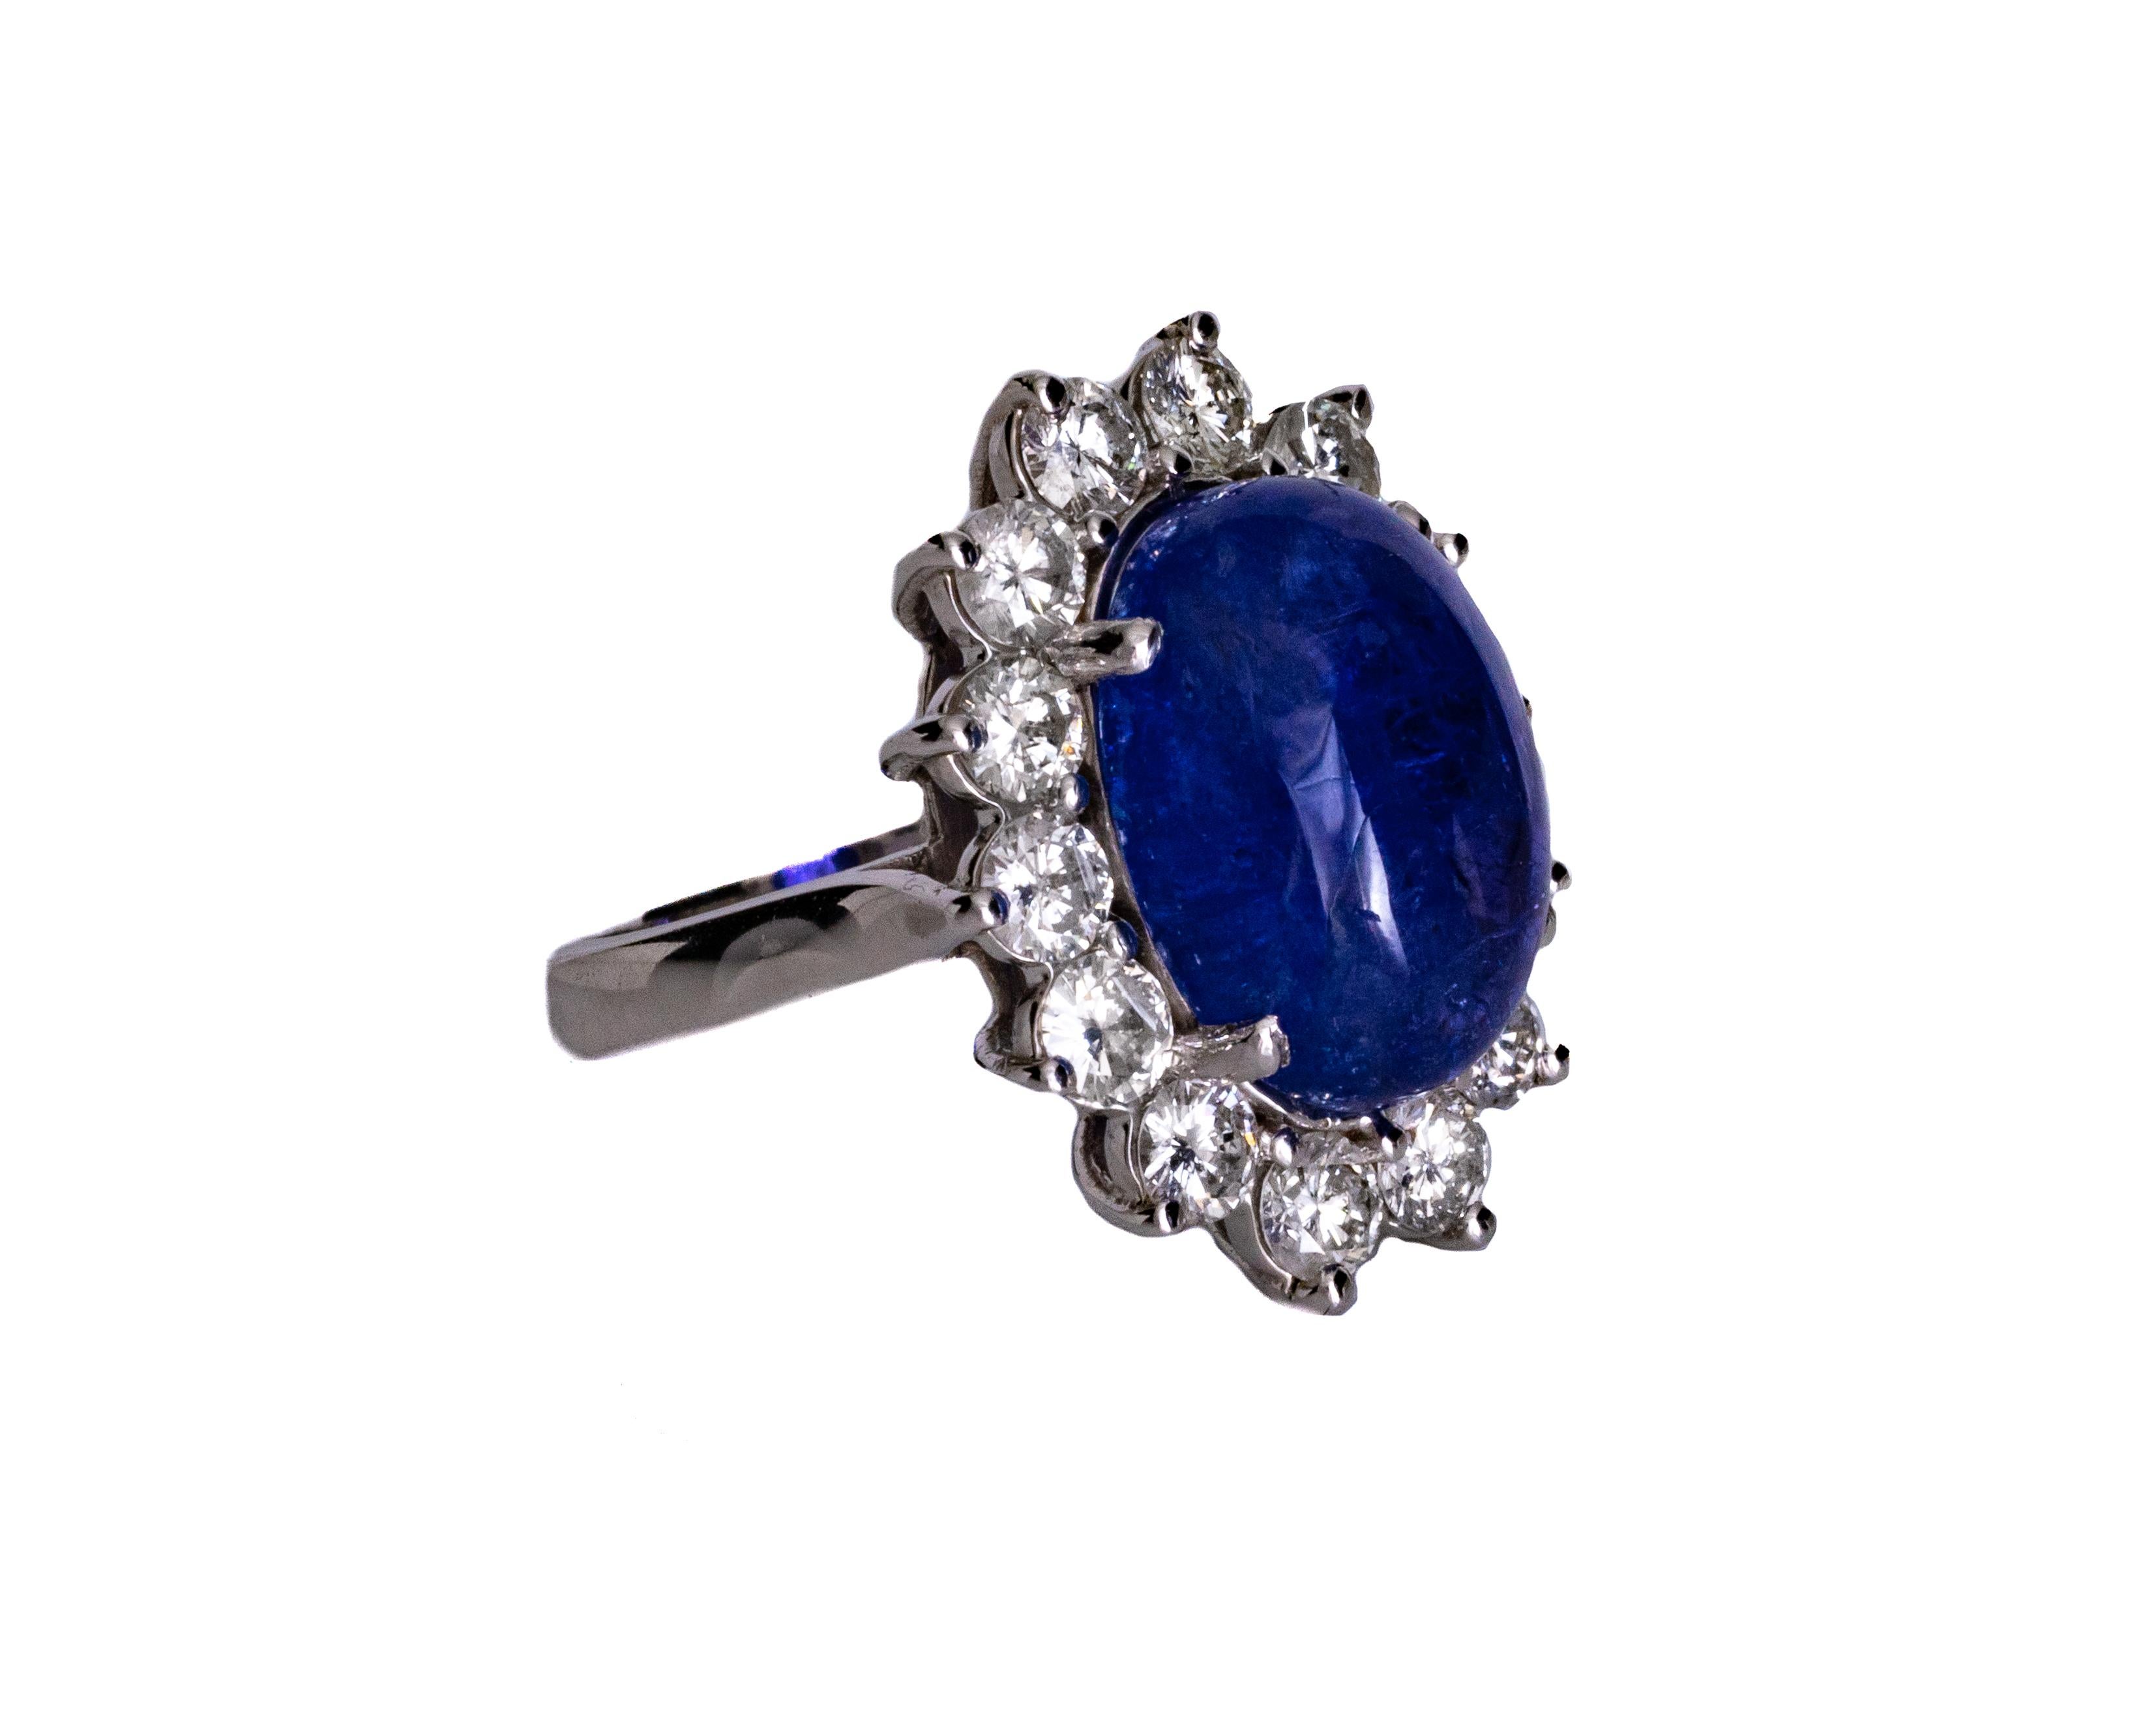 Ring Details:
Metal type: 14 Karat White Gold
Weight: 11.34 grams
Ring Size: 7.5 

Diamond Details:
Carat: 3.4 Carat Total
Cut: Round Brilliant
Color: G-H
Clarity: VS-I1

Tanzanite Details:
Carat: 13 Carat
Cut: Oval Cabochon
Color: Blue

Absolutely